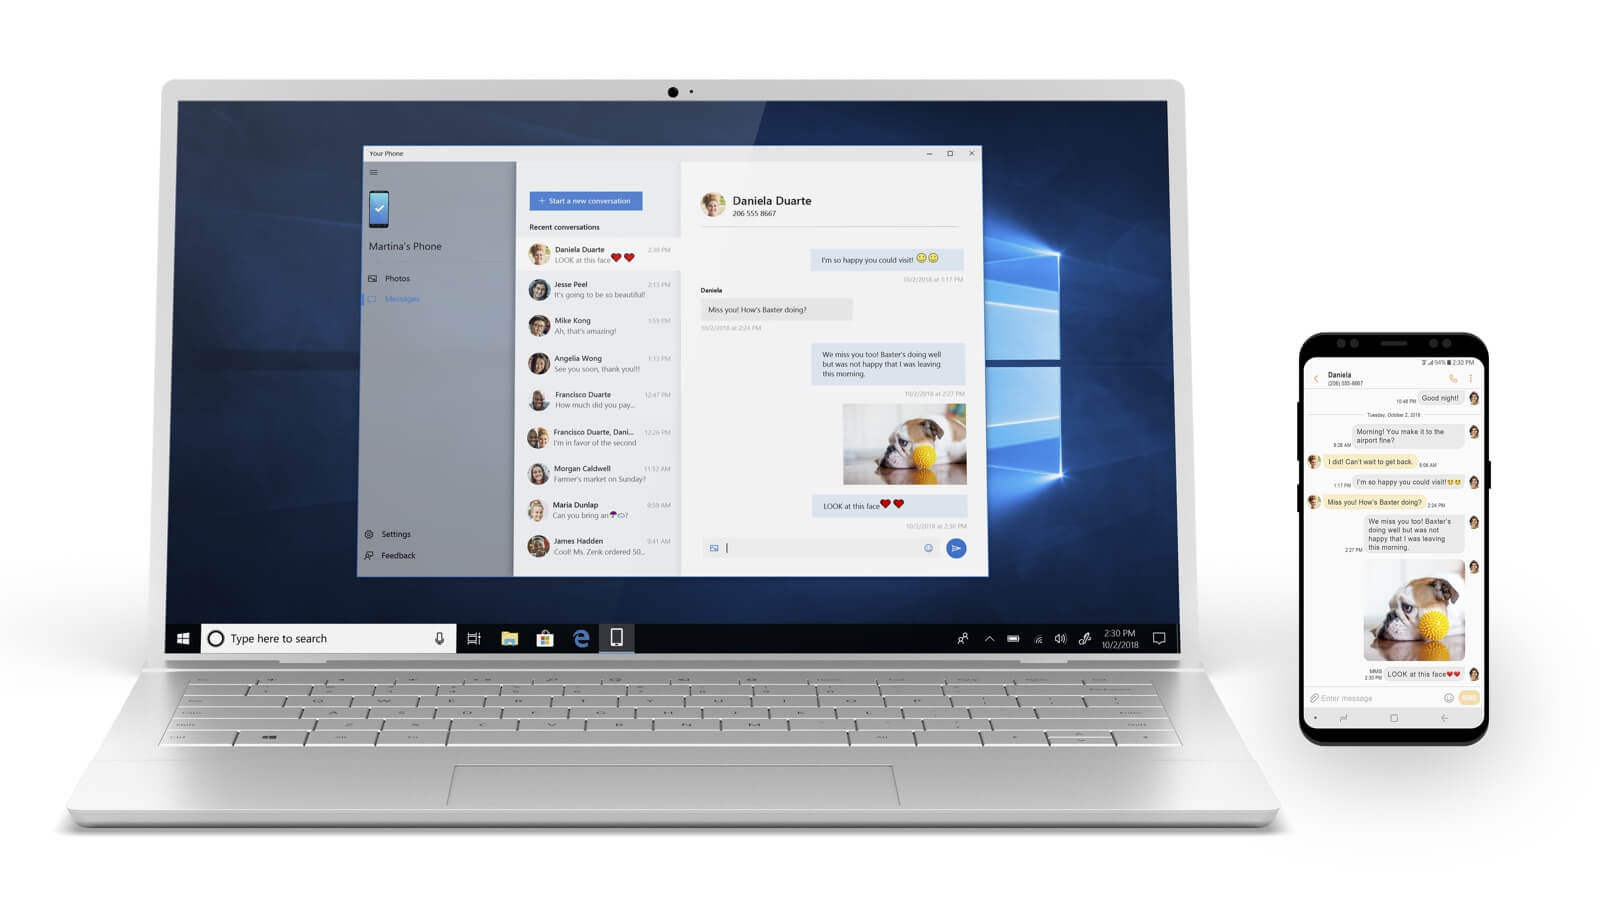 Microsoft's Your Phone App for Windows 10 can no longer be uninstalled